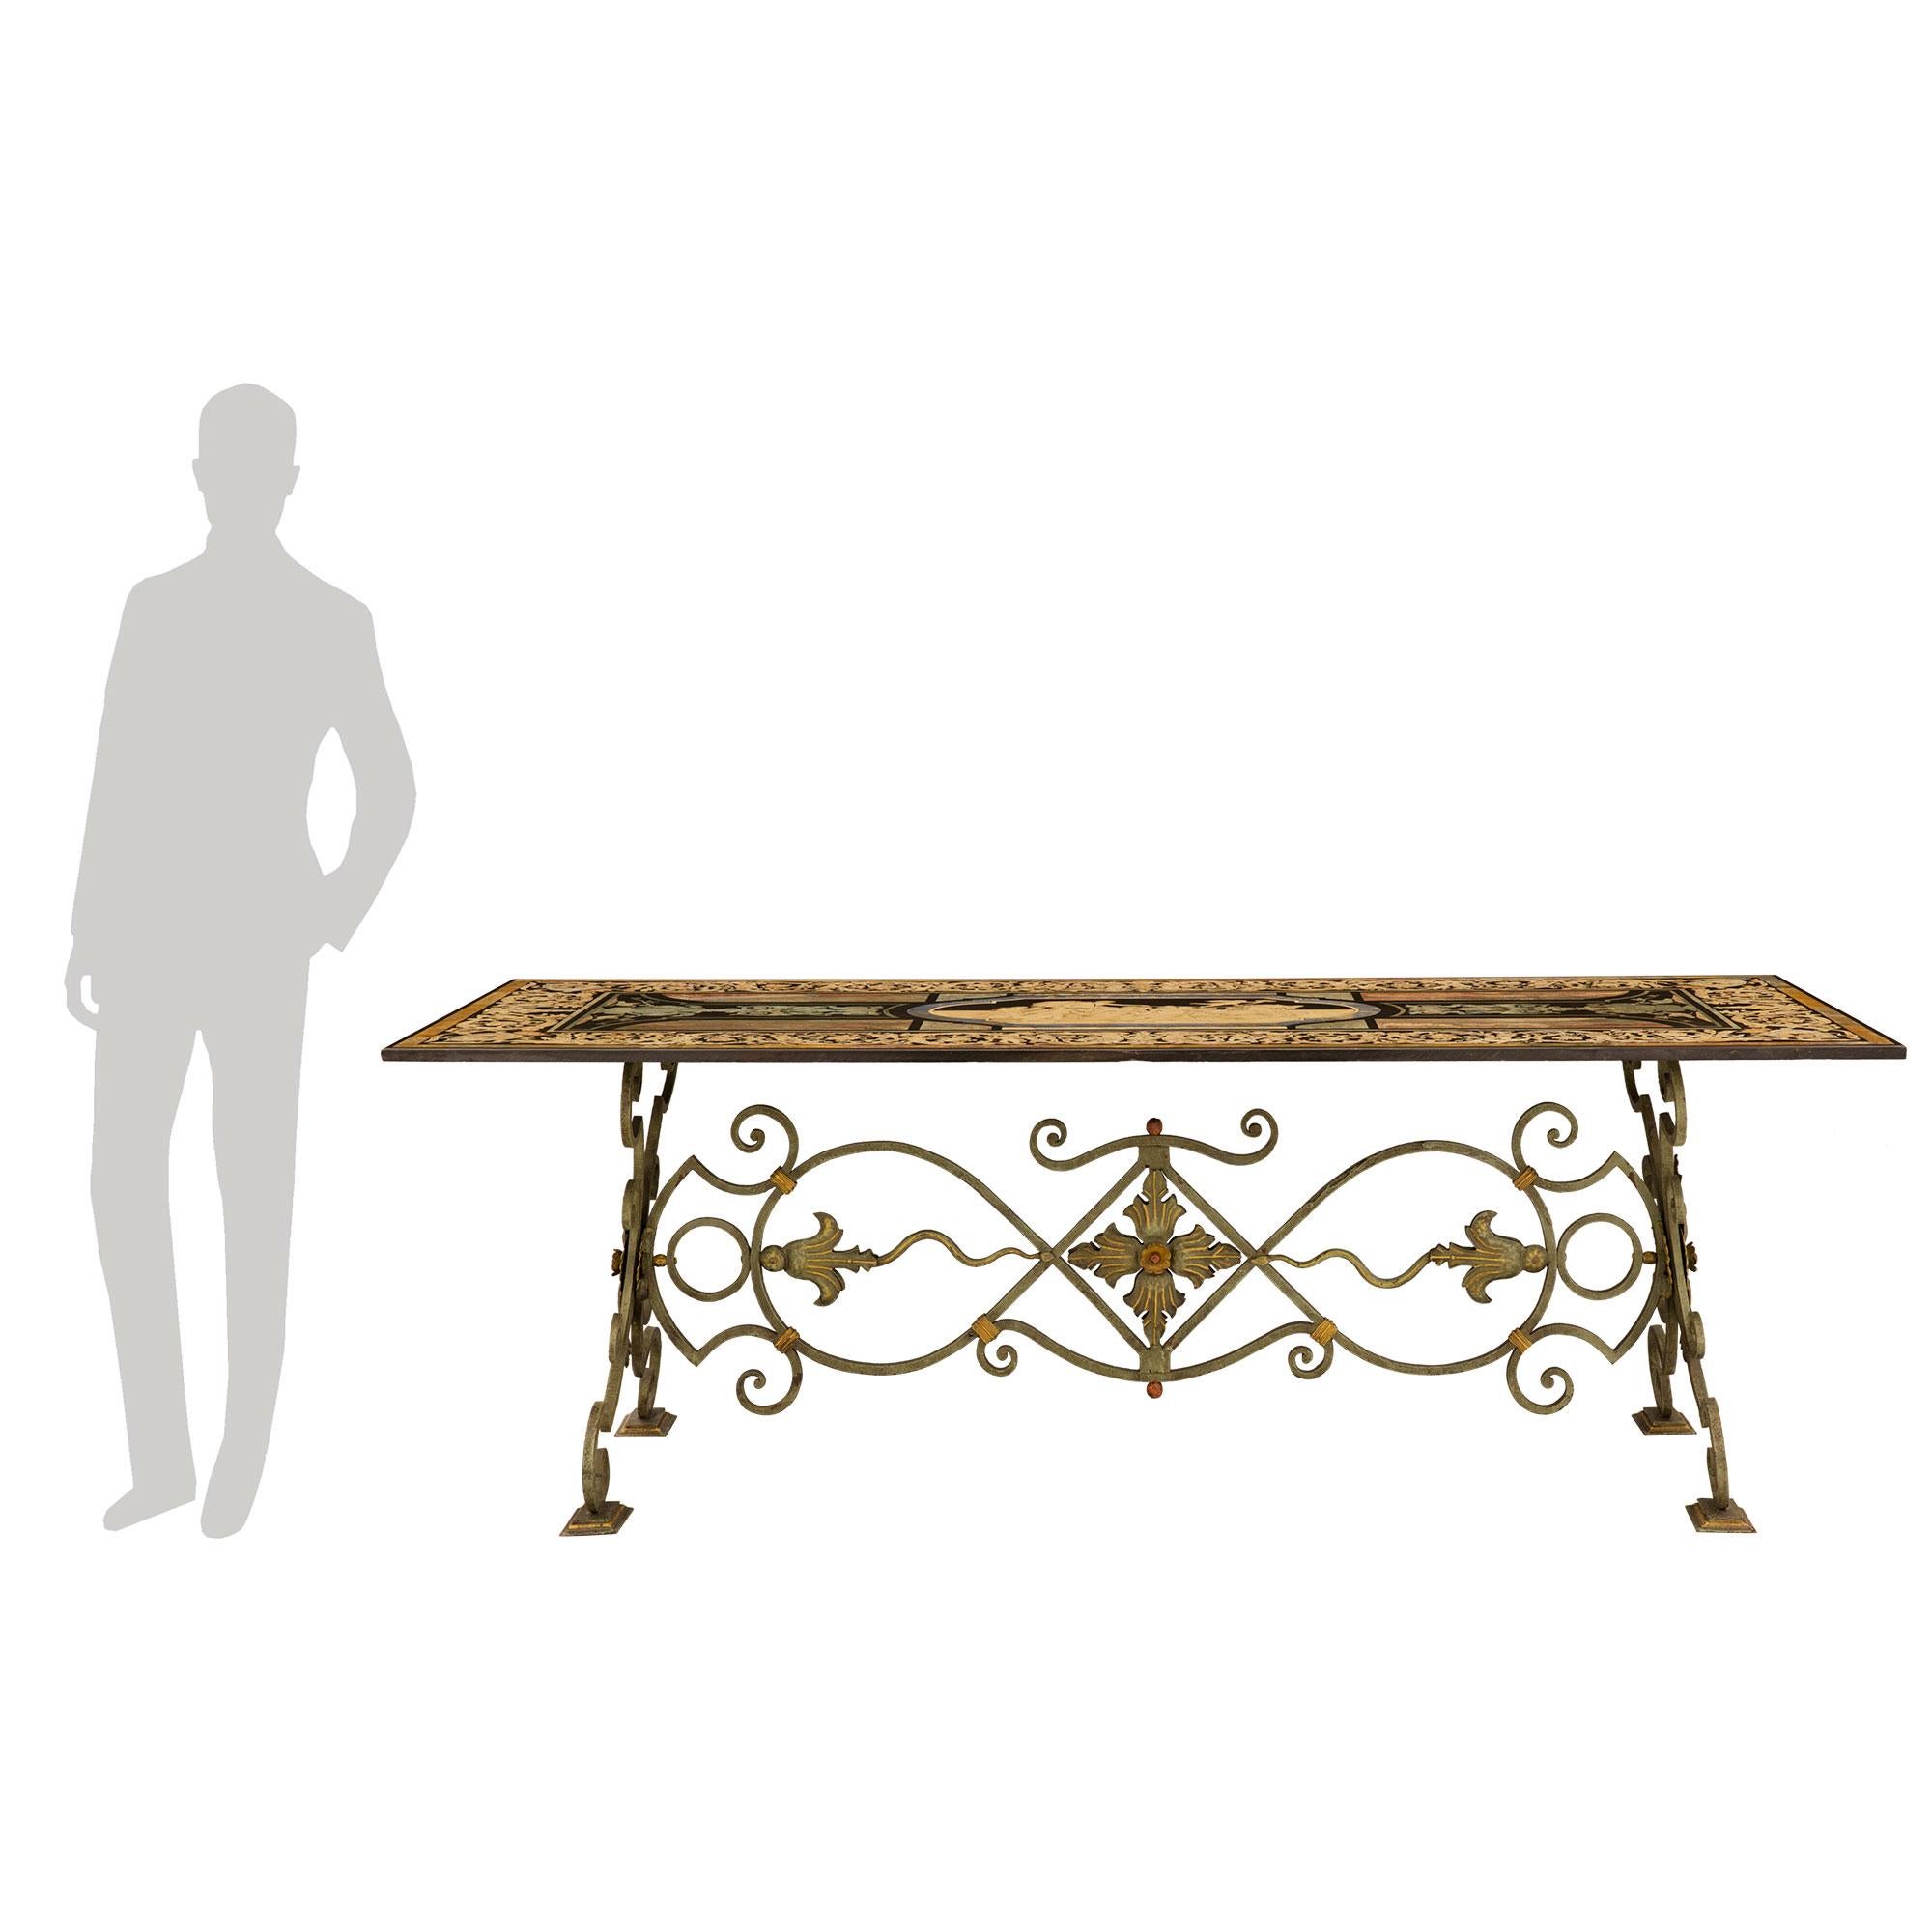 A stunning Italian 19th century verdigris patinated wrought iron, gilt and Scagliola center/dining table. The table is raised by a beautiful verdigris patinated wrought iron base with gilt accents, striking scrolled movements and lovely foliate